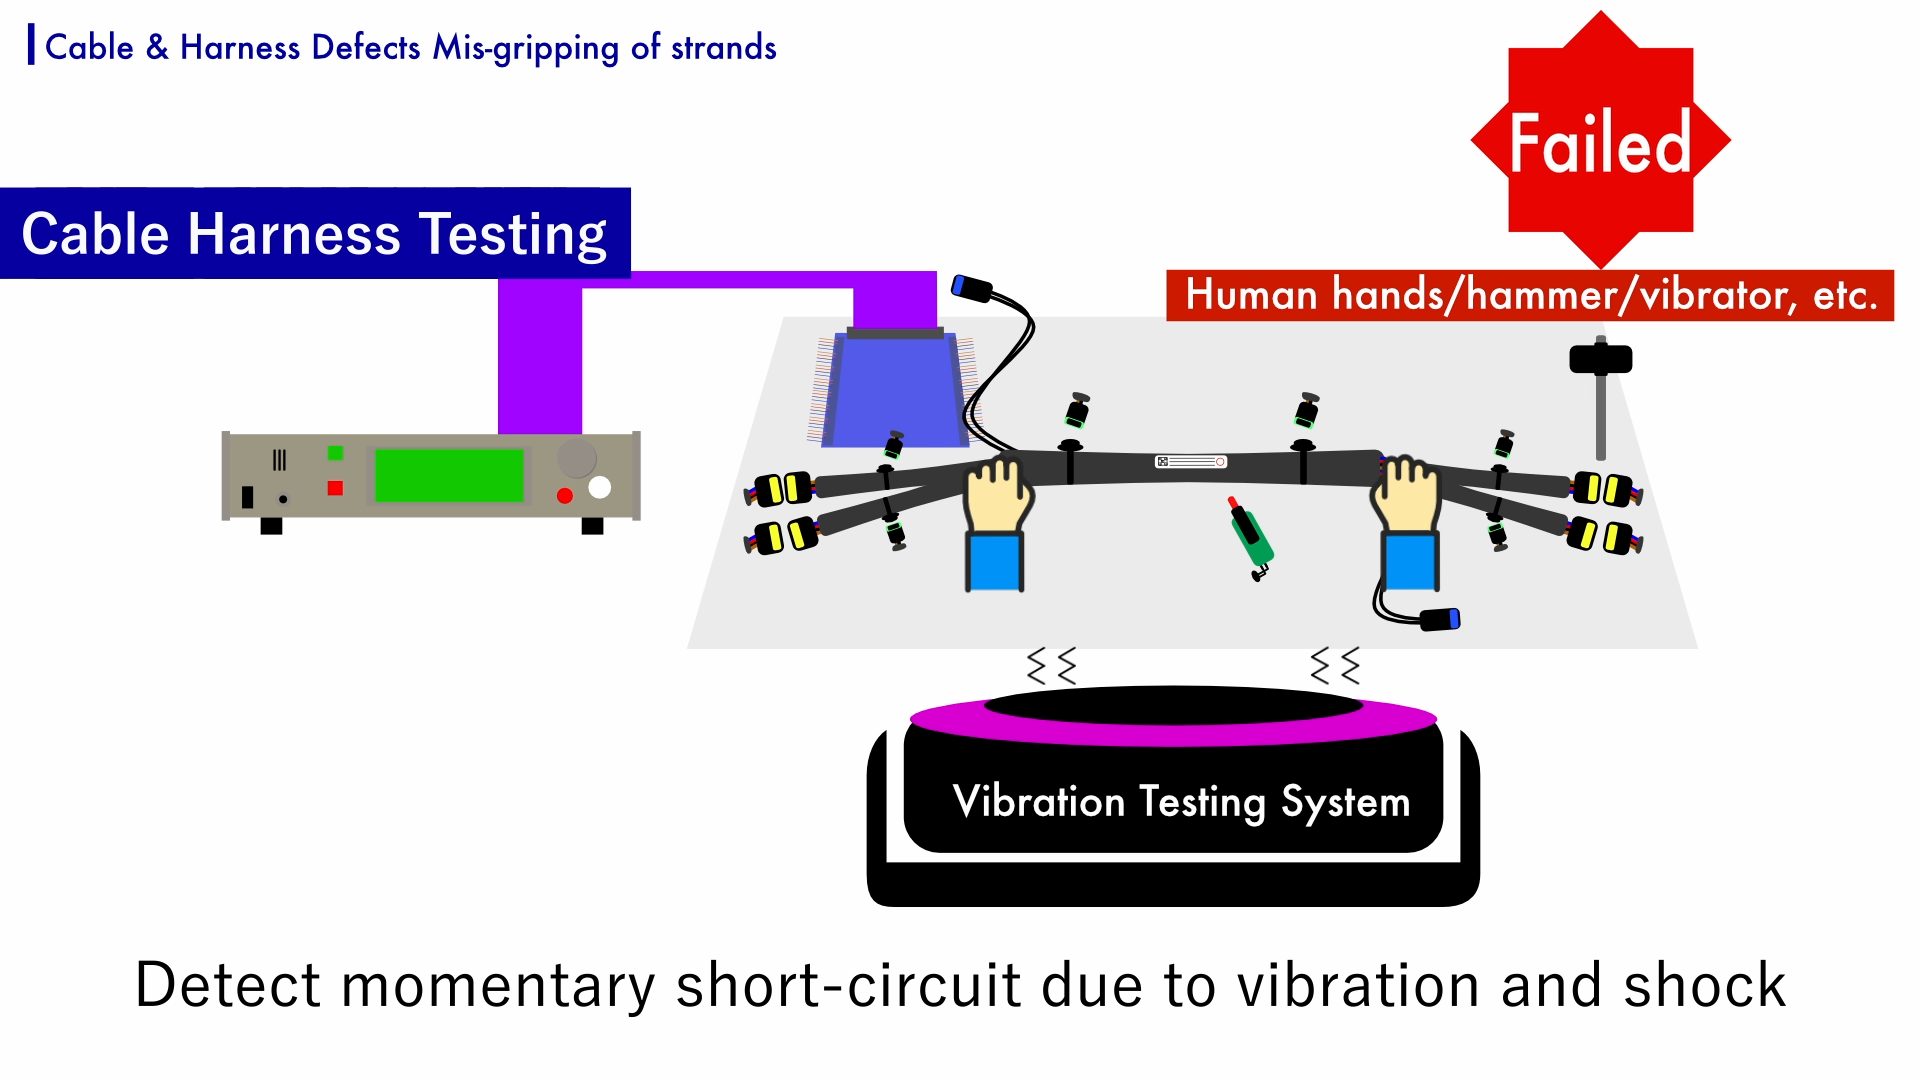 Vibration or shock is applied to determine if a short circuit occurs.